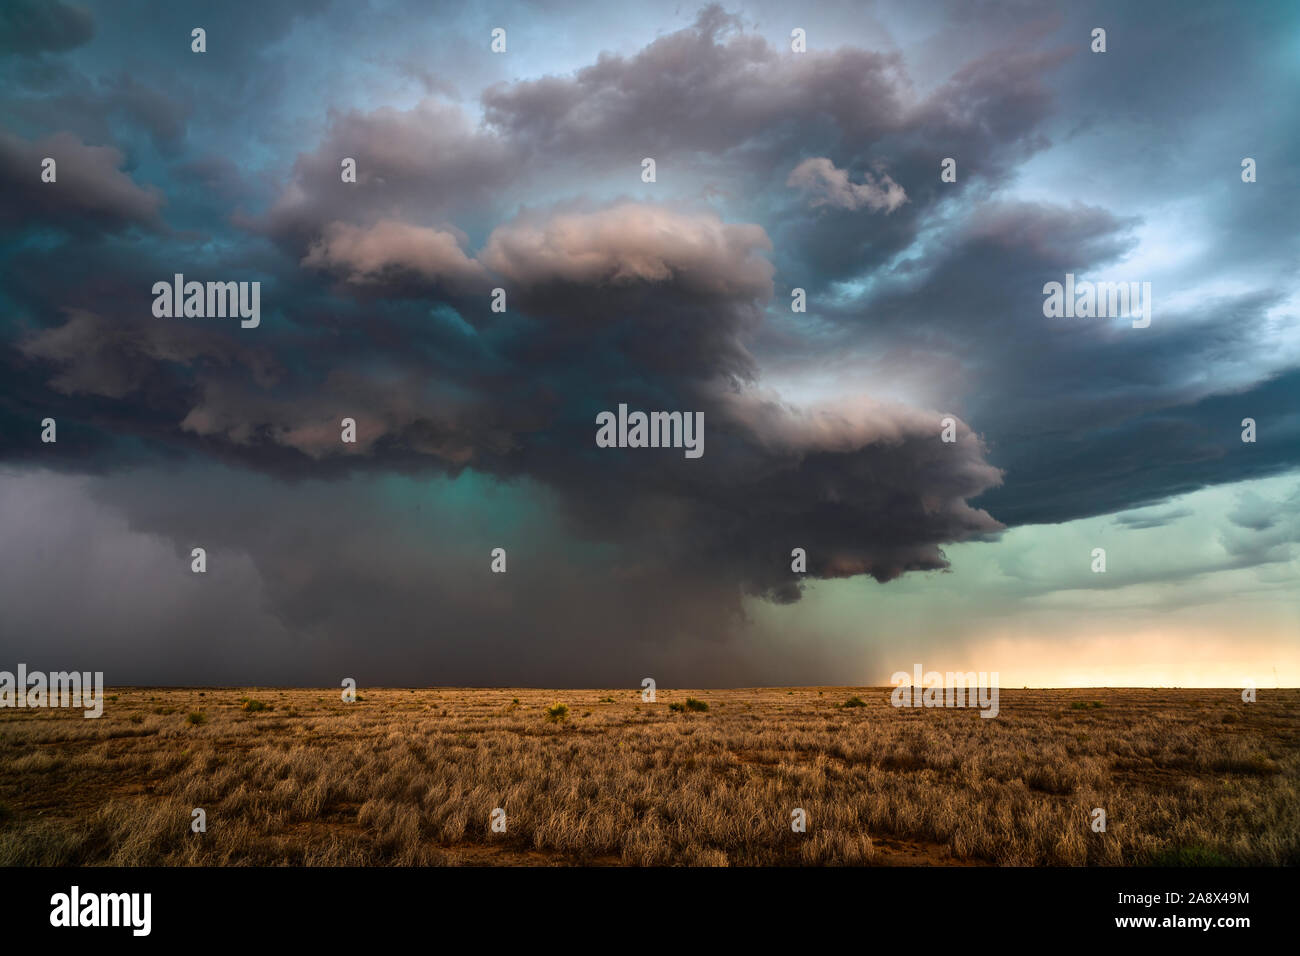 A supercell thunderstorm with dramatic storm clouds during a severe weather event in New Mexico Stock Photo